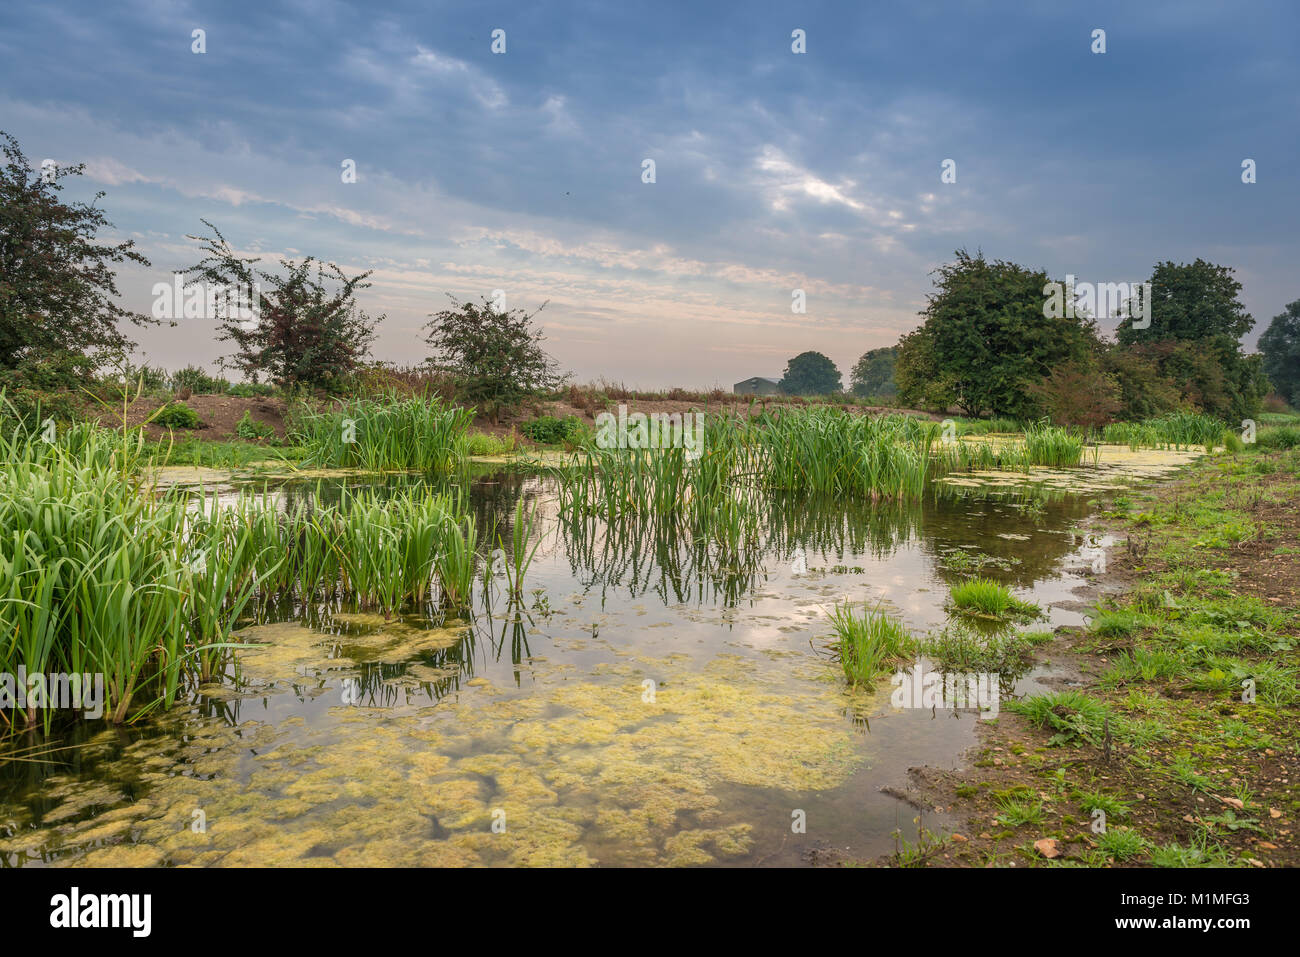 The wetlands and lowlands of the Lincolnshire Fens during an early Autumn morning near Kate's Bridge, Thurlby, South Lincolnshire, UK Stock Photo